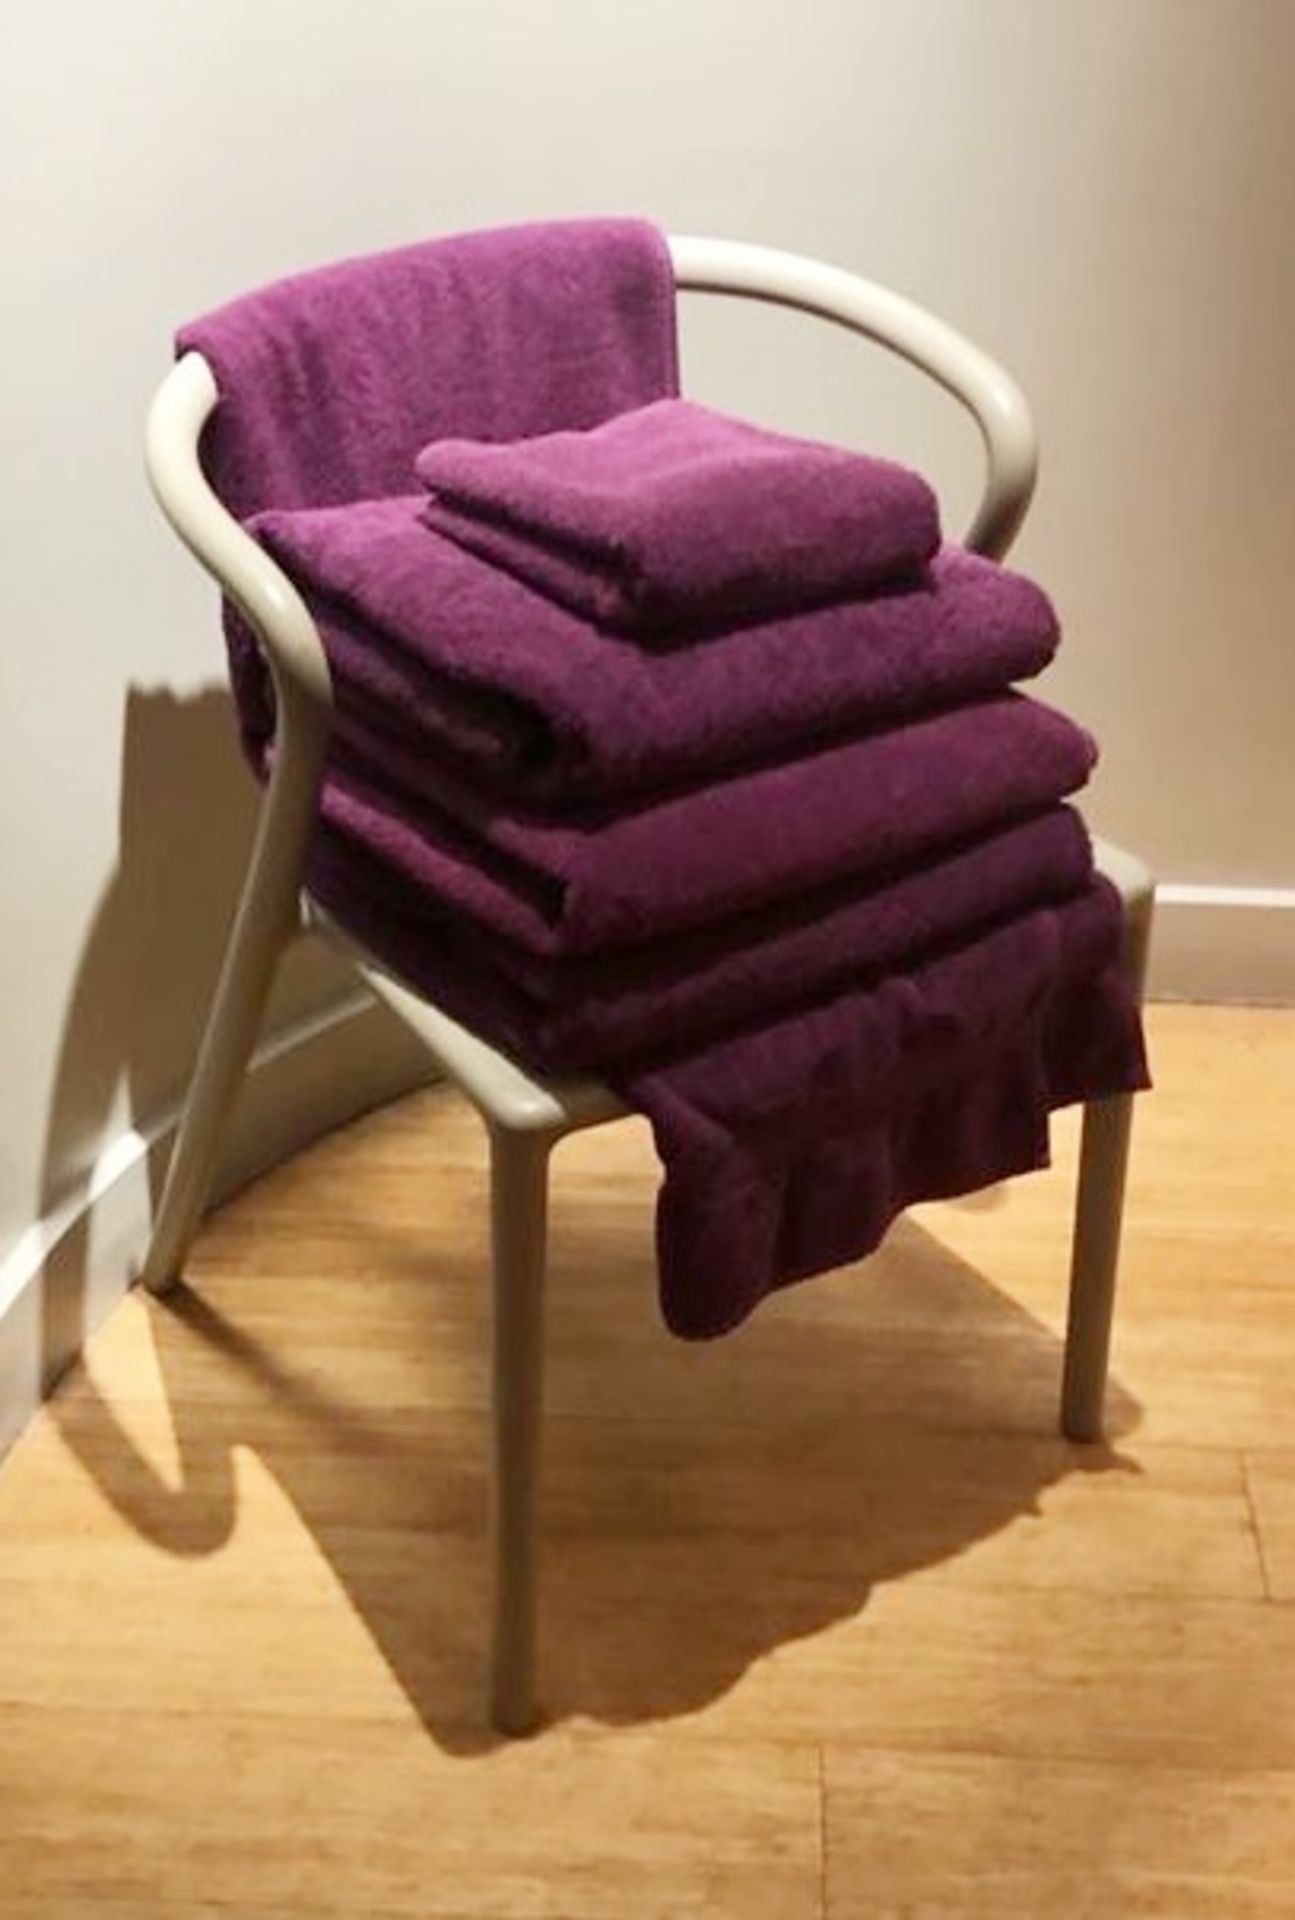 20 x Majestic Luxury 620gsm Bath Towels in Purple - Size MEDIUM - RRP £190 - CL587 - Location: - Image 4 of 4